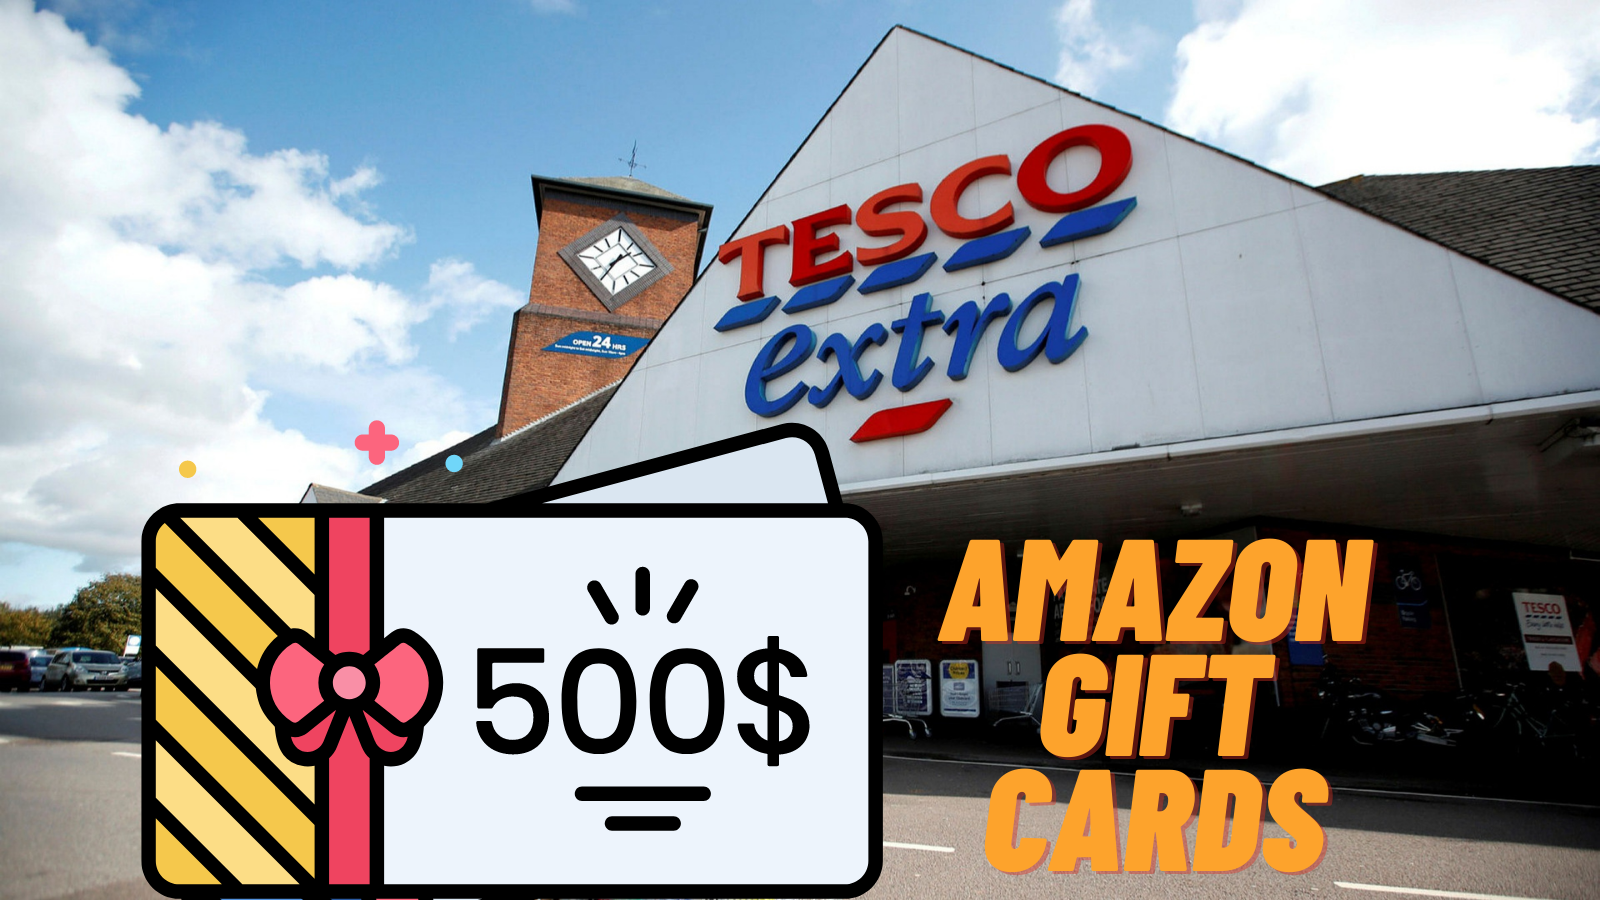 Does Tesco Sell Amazon Gift Cards?